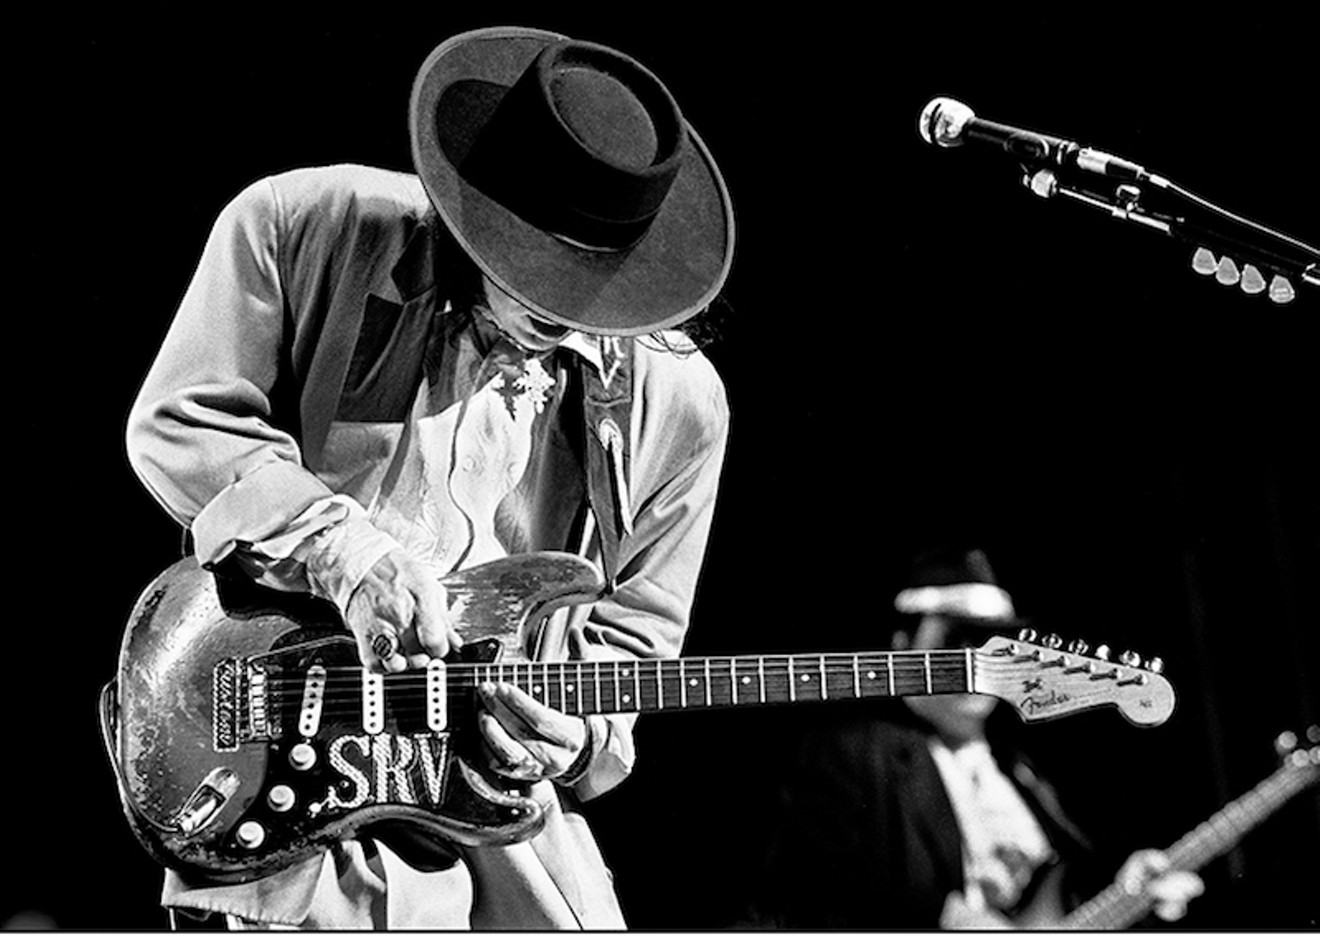 Tracy Anne Hart will release her impressive, first hand documentation of the rise of Stevie Ray Vaughan and Texas Blues in her new book, Seeing Stevie Ray.